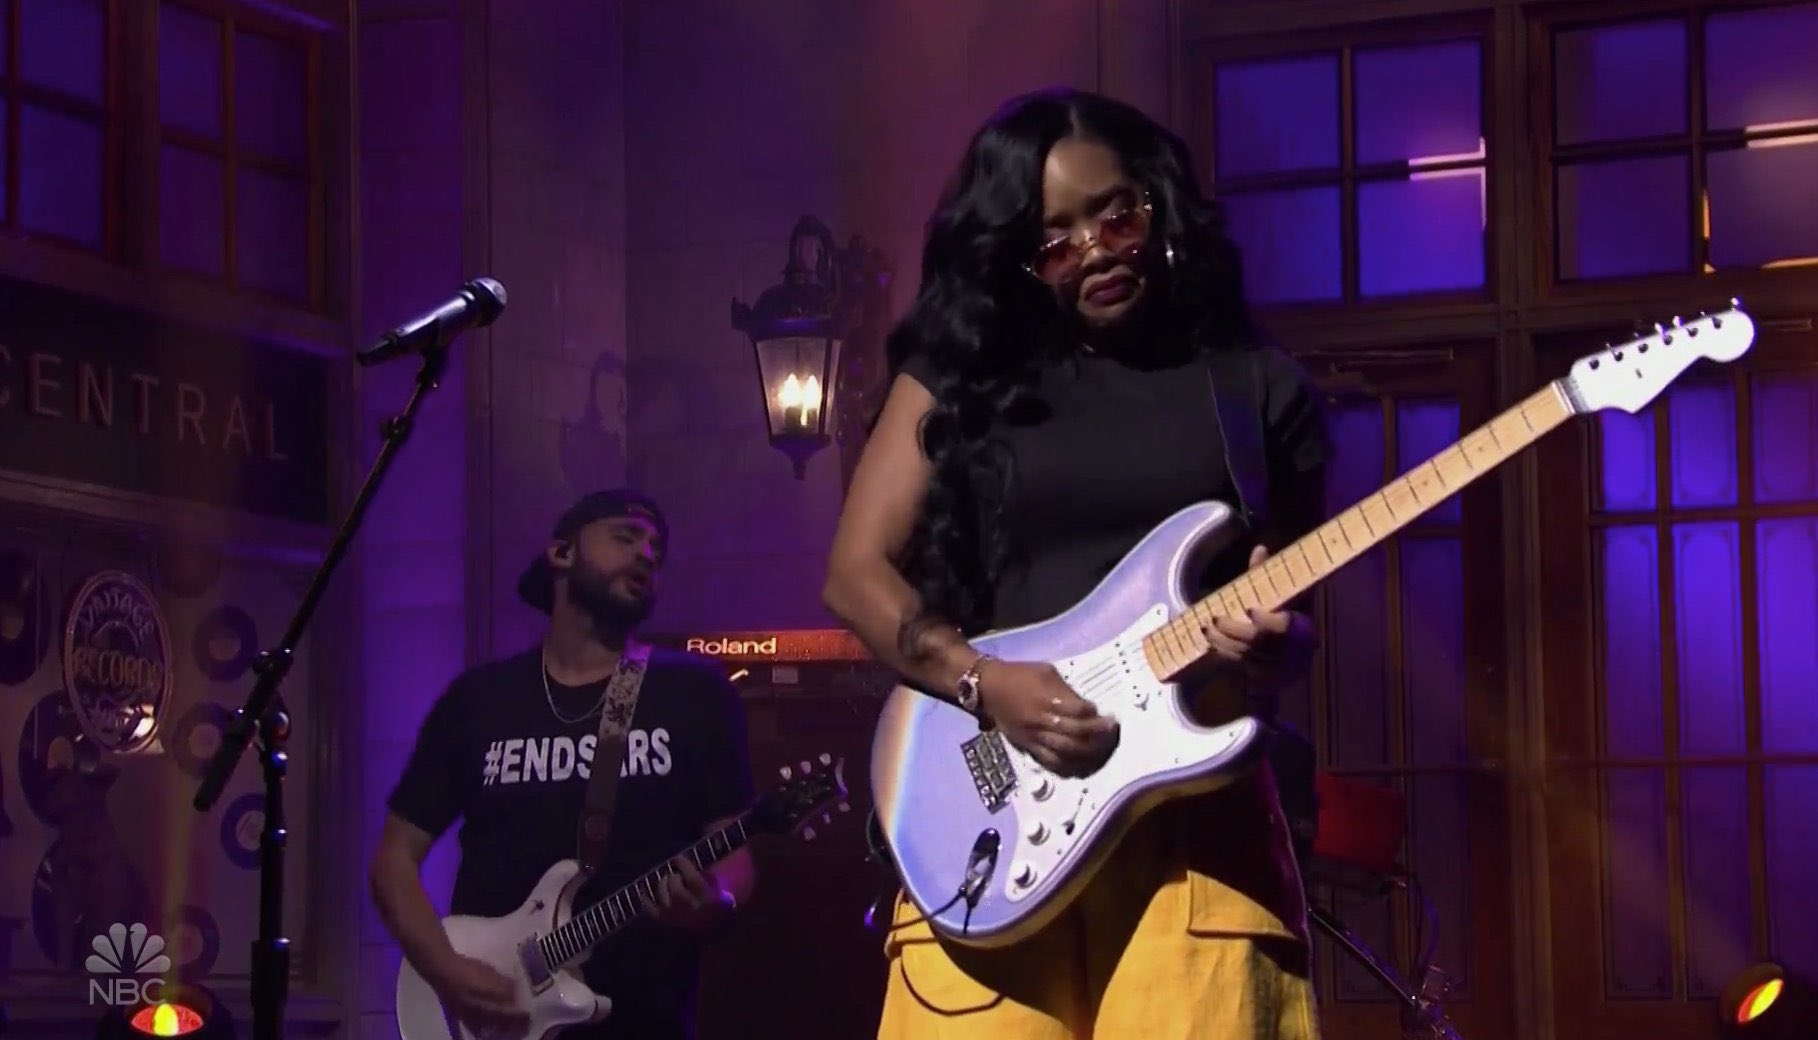 H.E.R. Promotes #EndSARS During ‘Saturday Night Live’ Performance